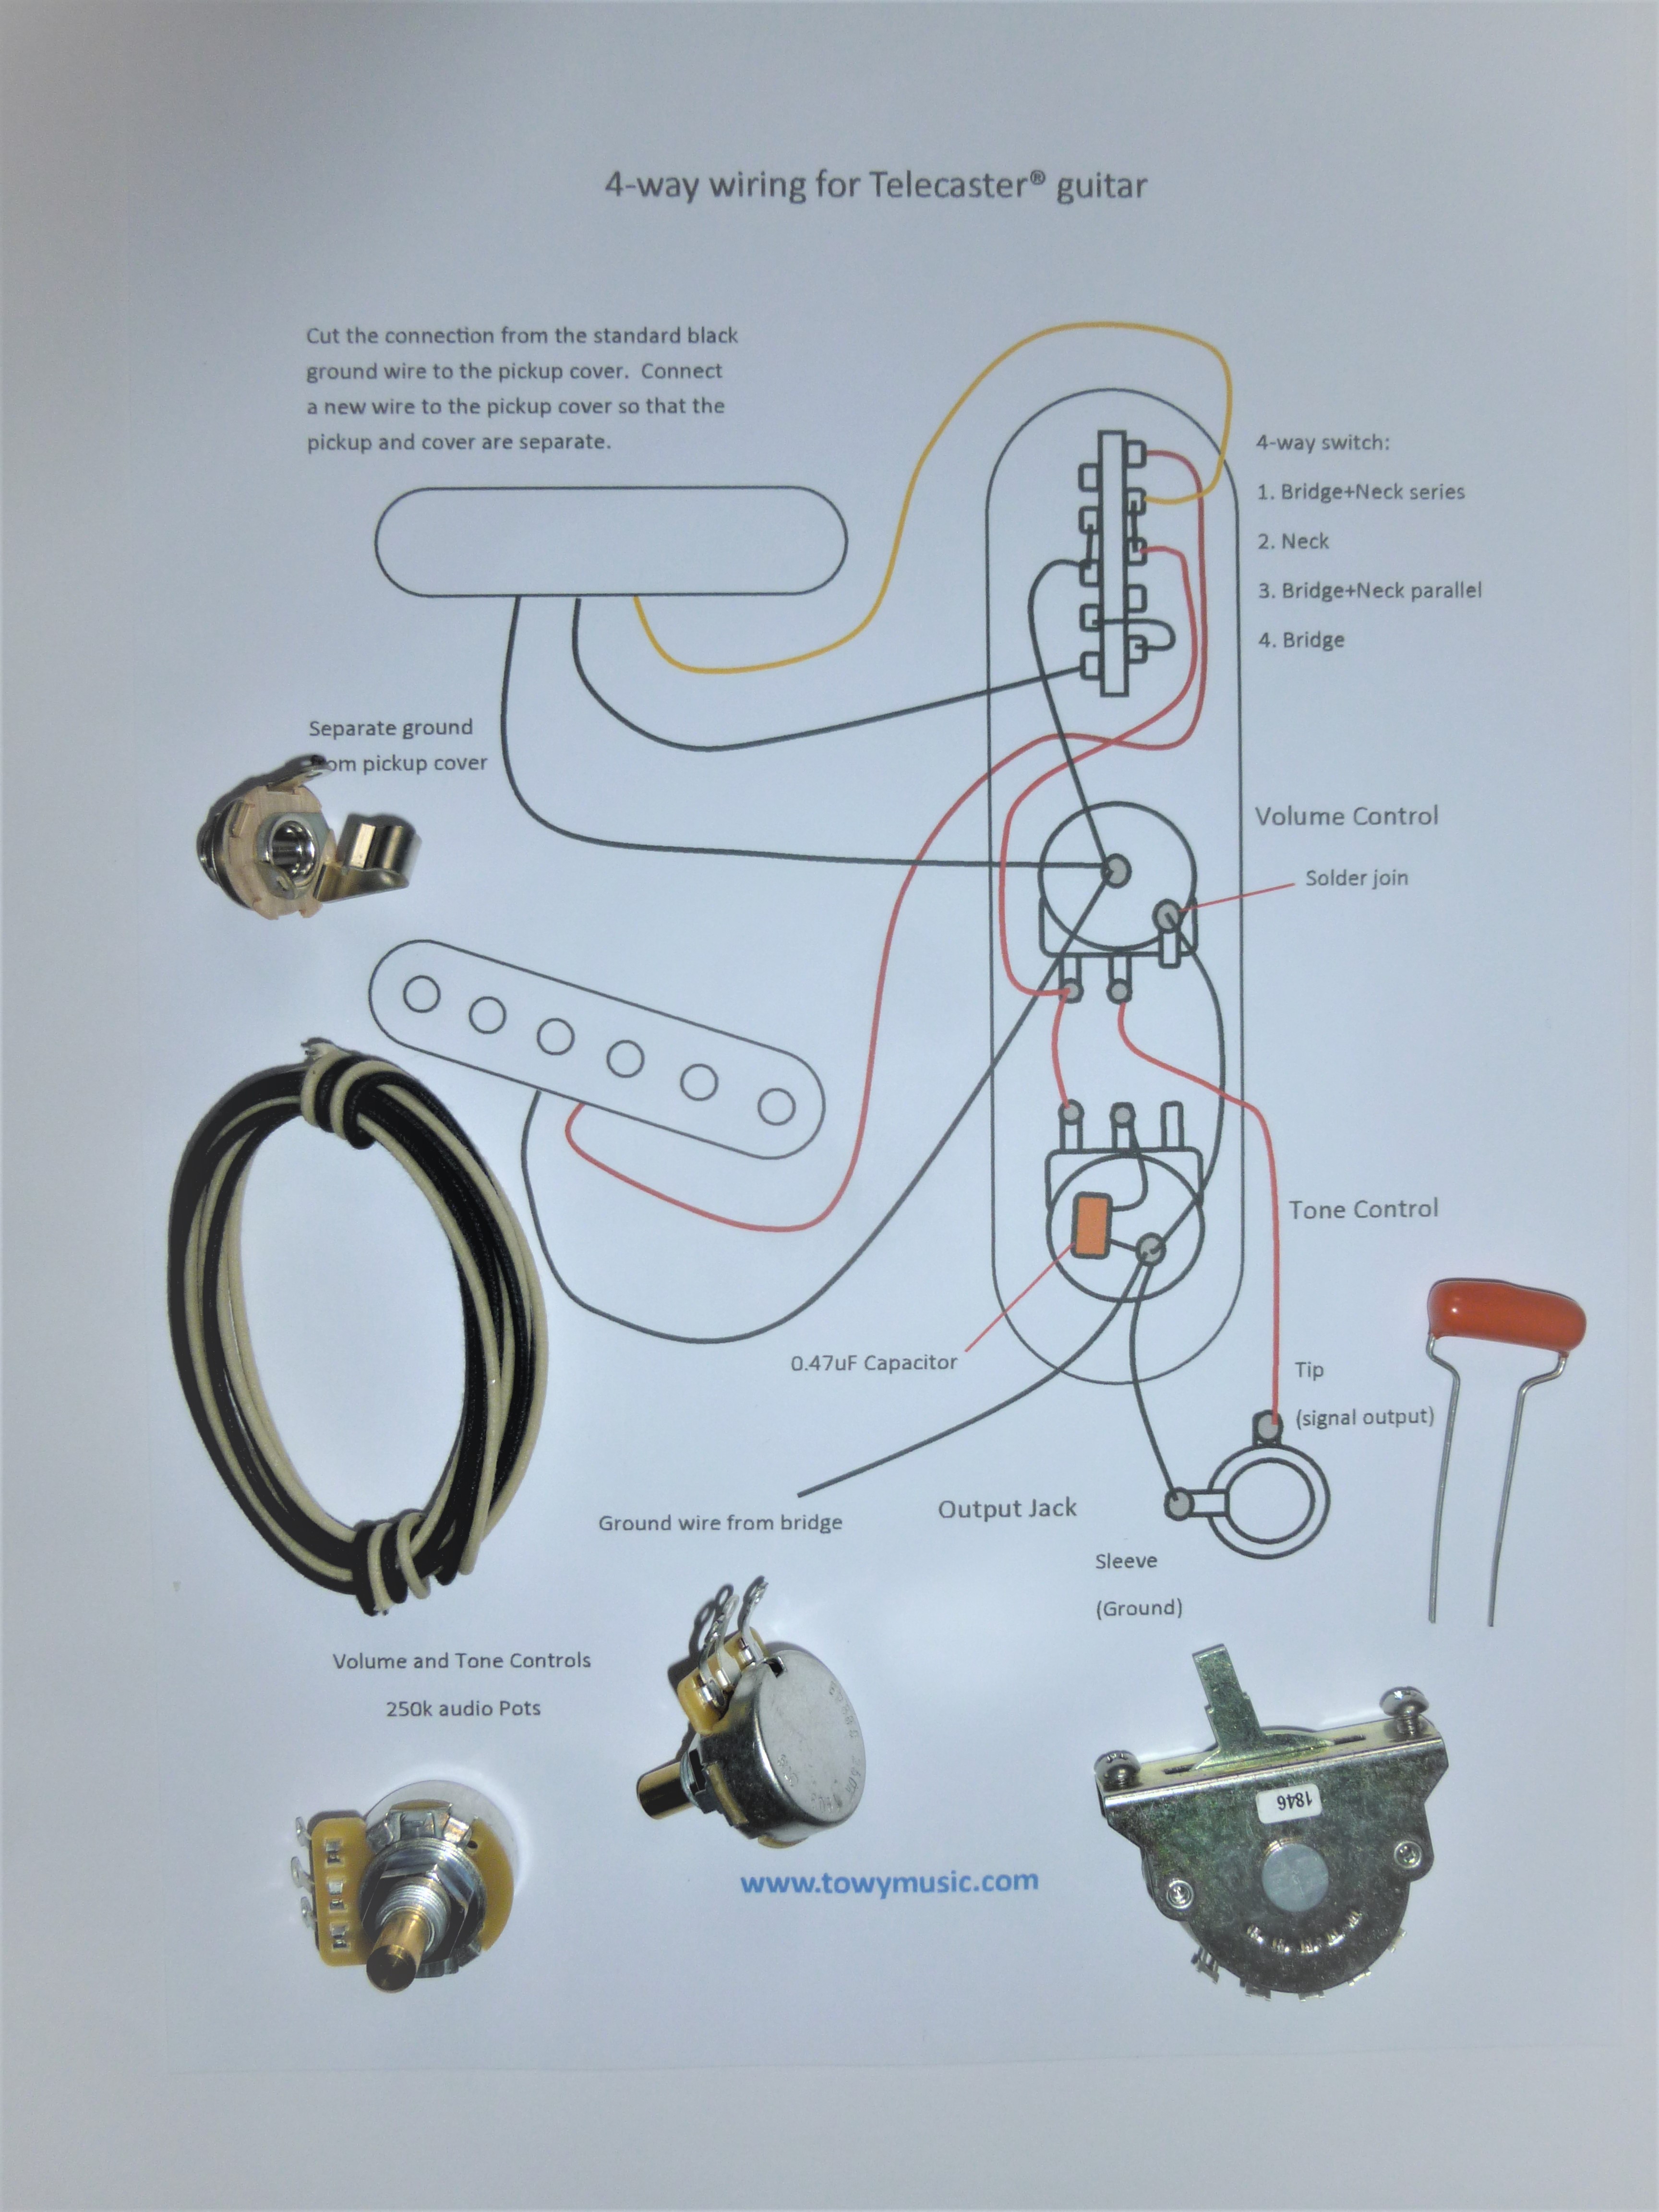 Wiring Diagram For Telecaster Guitar from towymusic.com